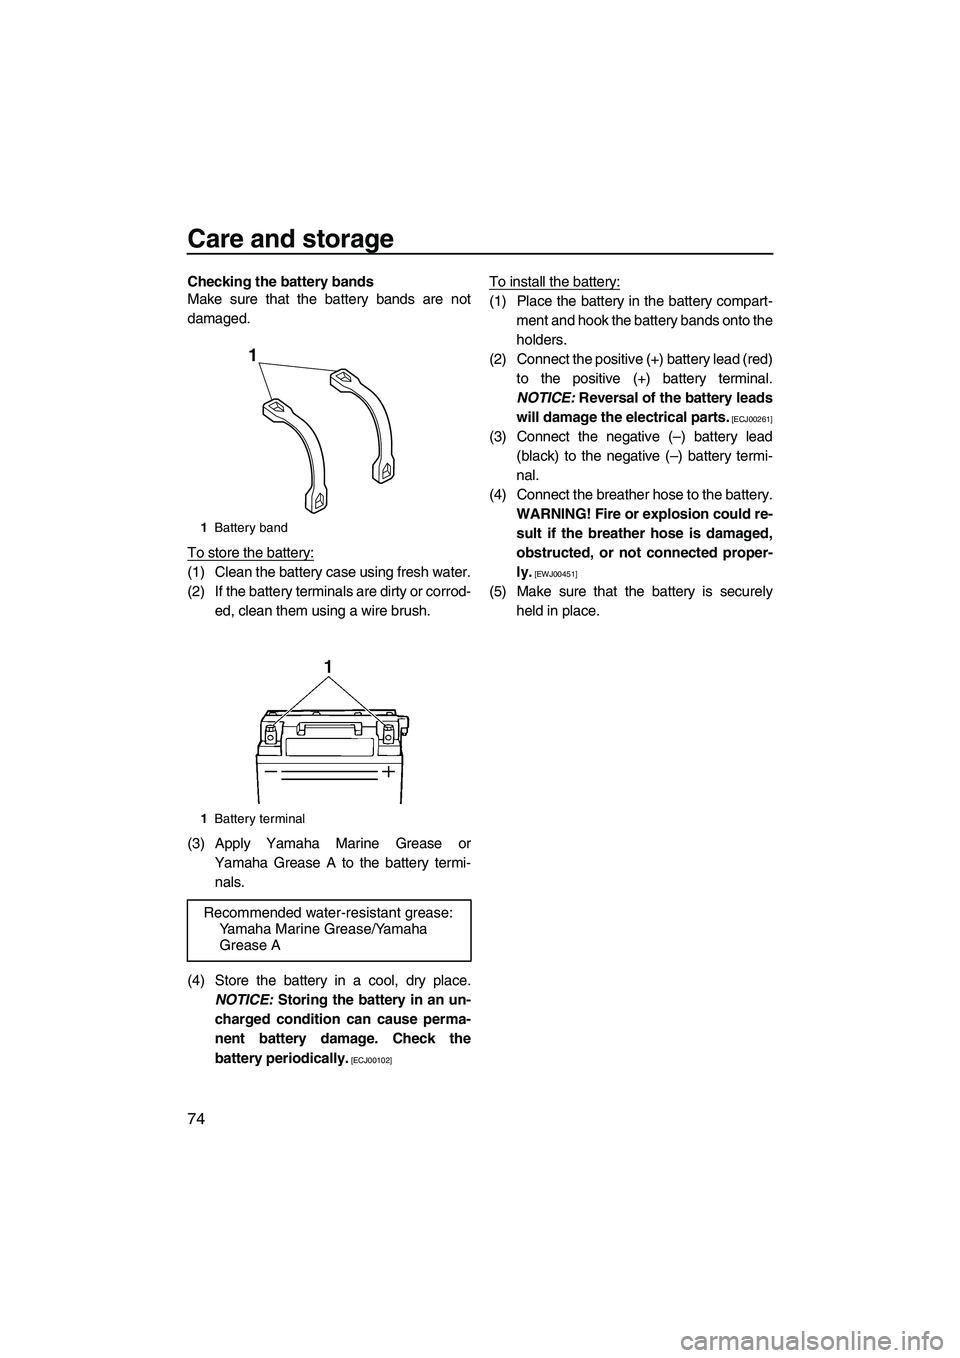 YAMAHA VX DELUXE 2013  Owners Manual Care and storage
74
Checking the battery bands
Make sure that the battery bands are not
damaged.
To store the battery:
(1) Clean the battery case using fresh water.
(2) If the battery terminals are di